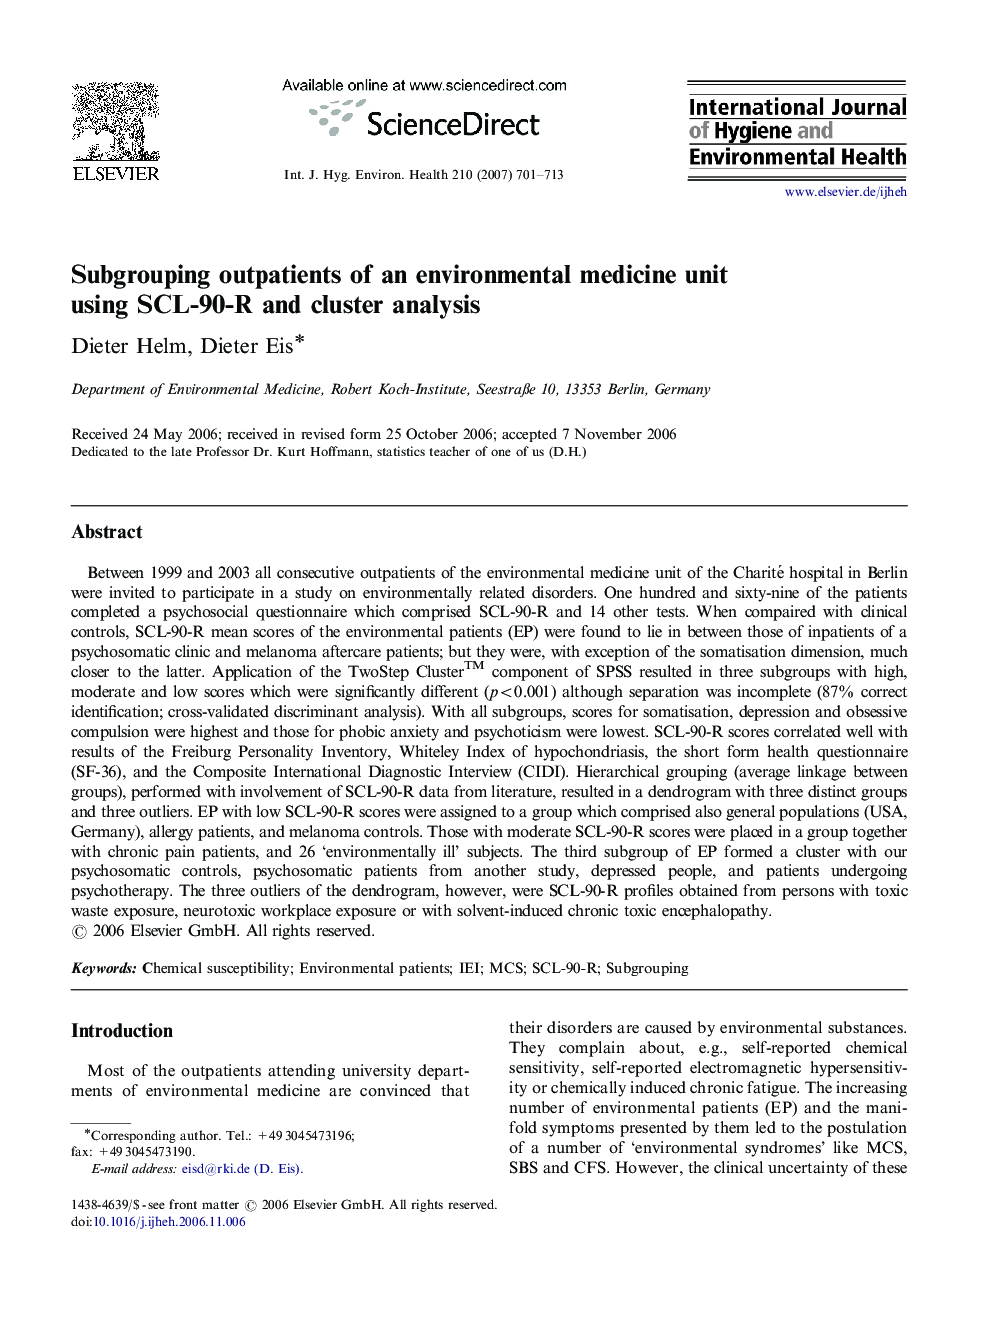 Subgrouping outpatients of an environmental medicine unit using SCL-90-R and cluster analysis